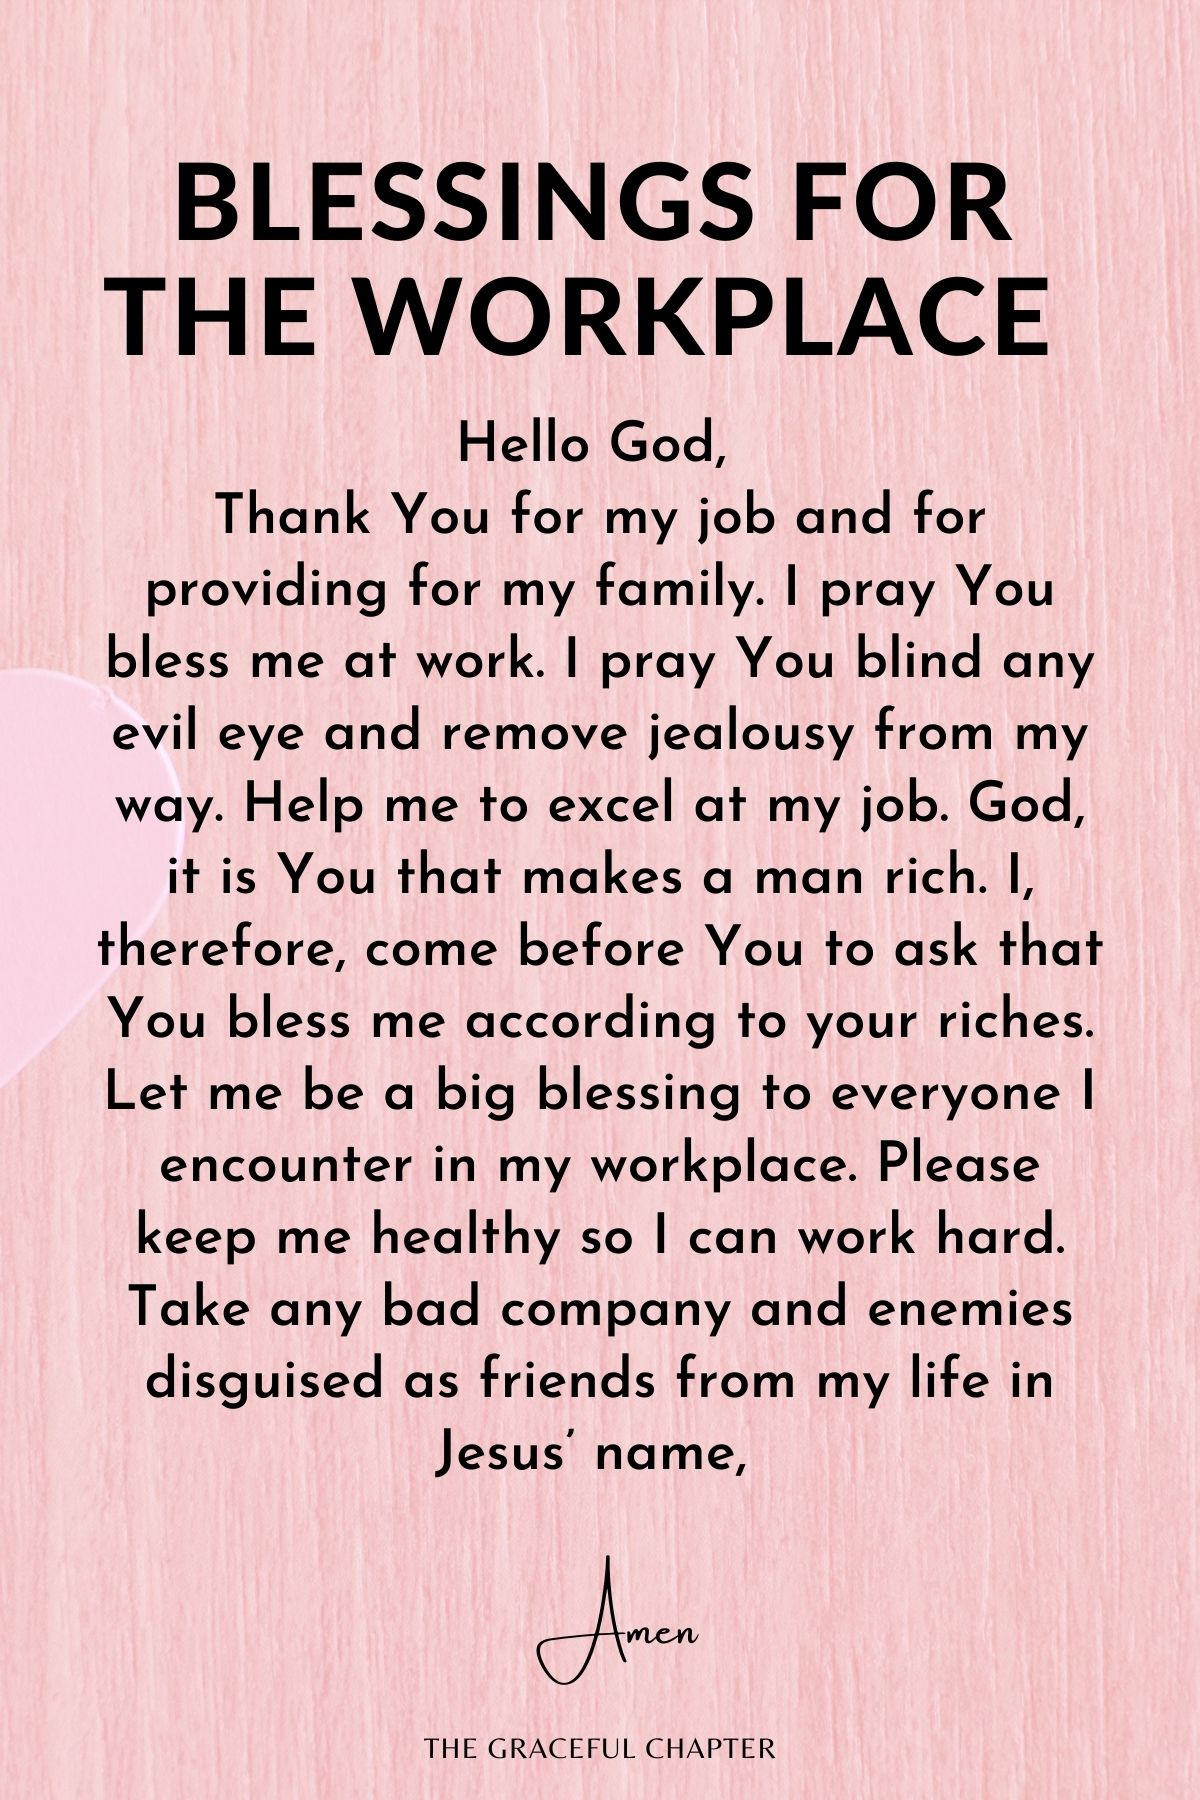 Blessings for the workplace 